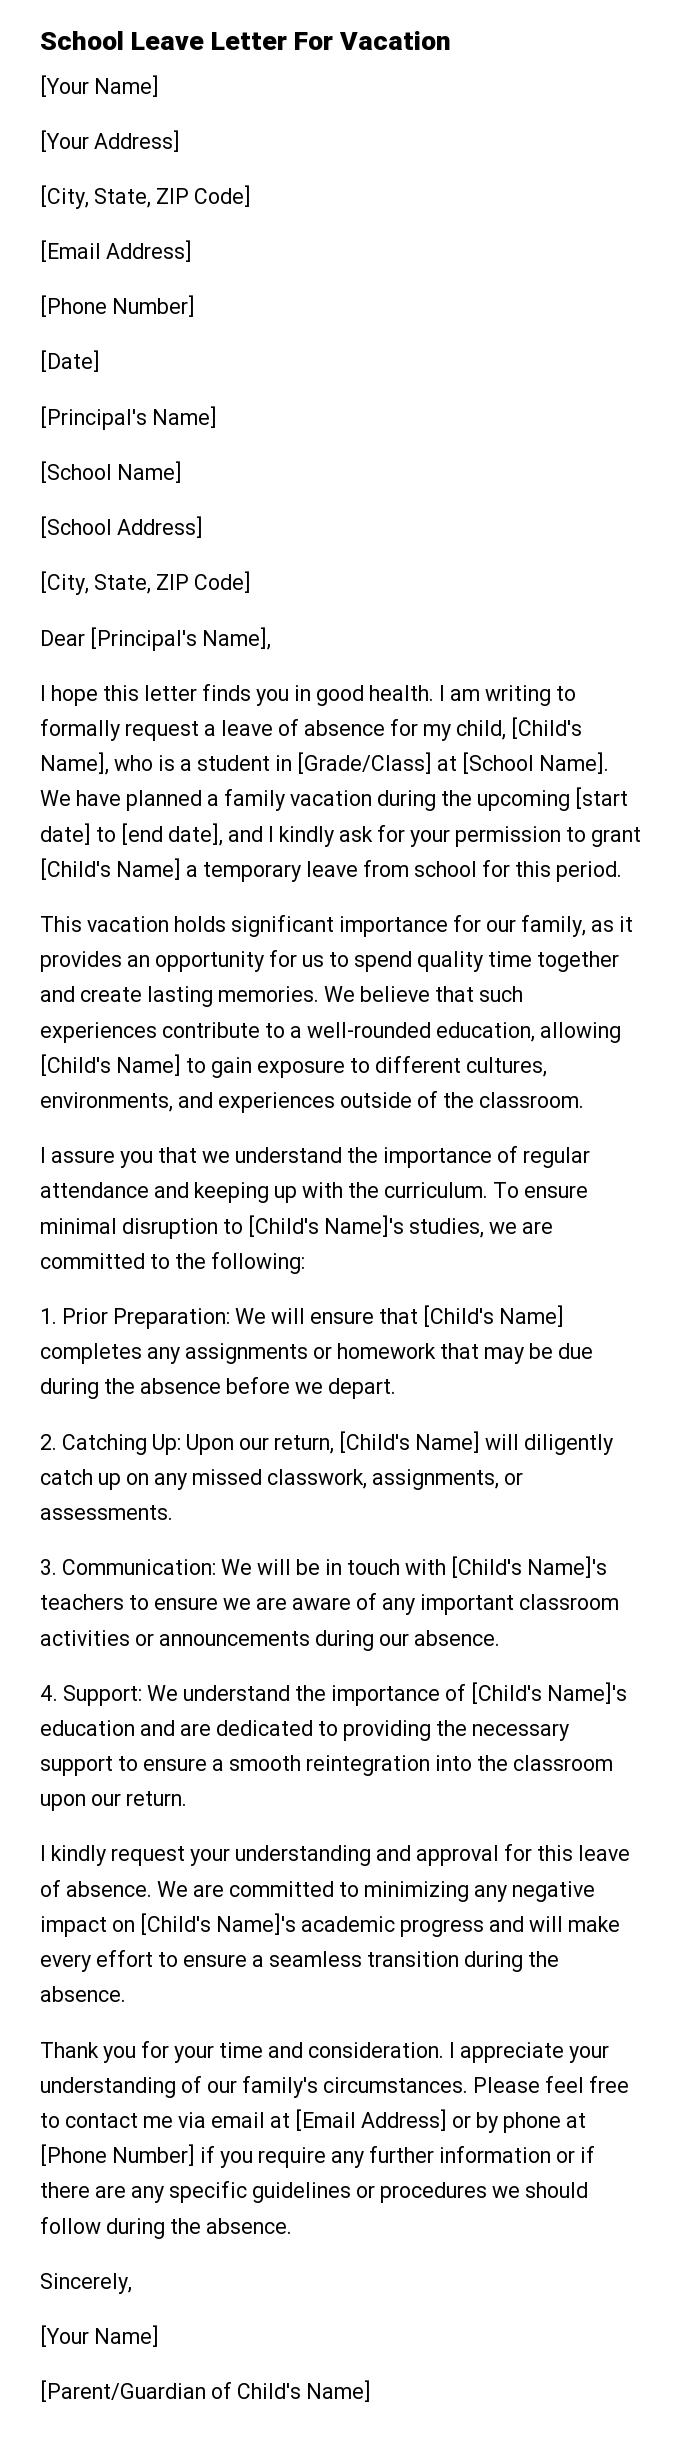 School Leave Letter For Vacation